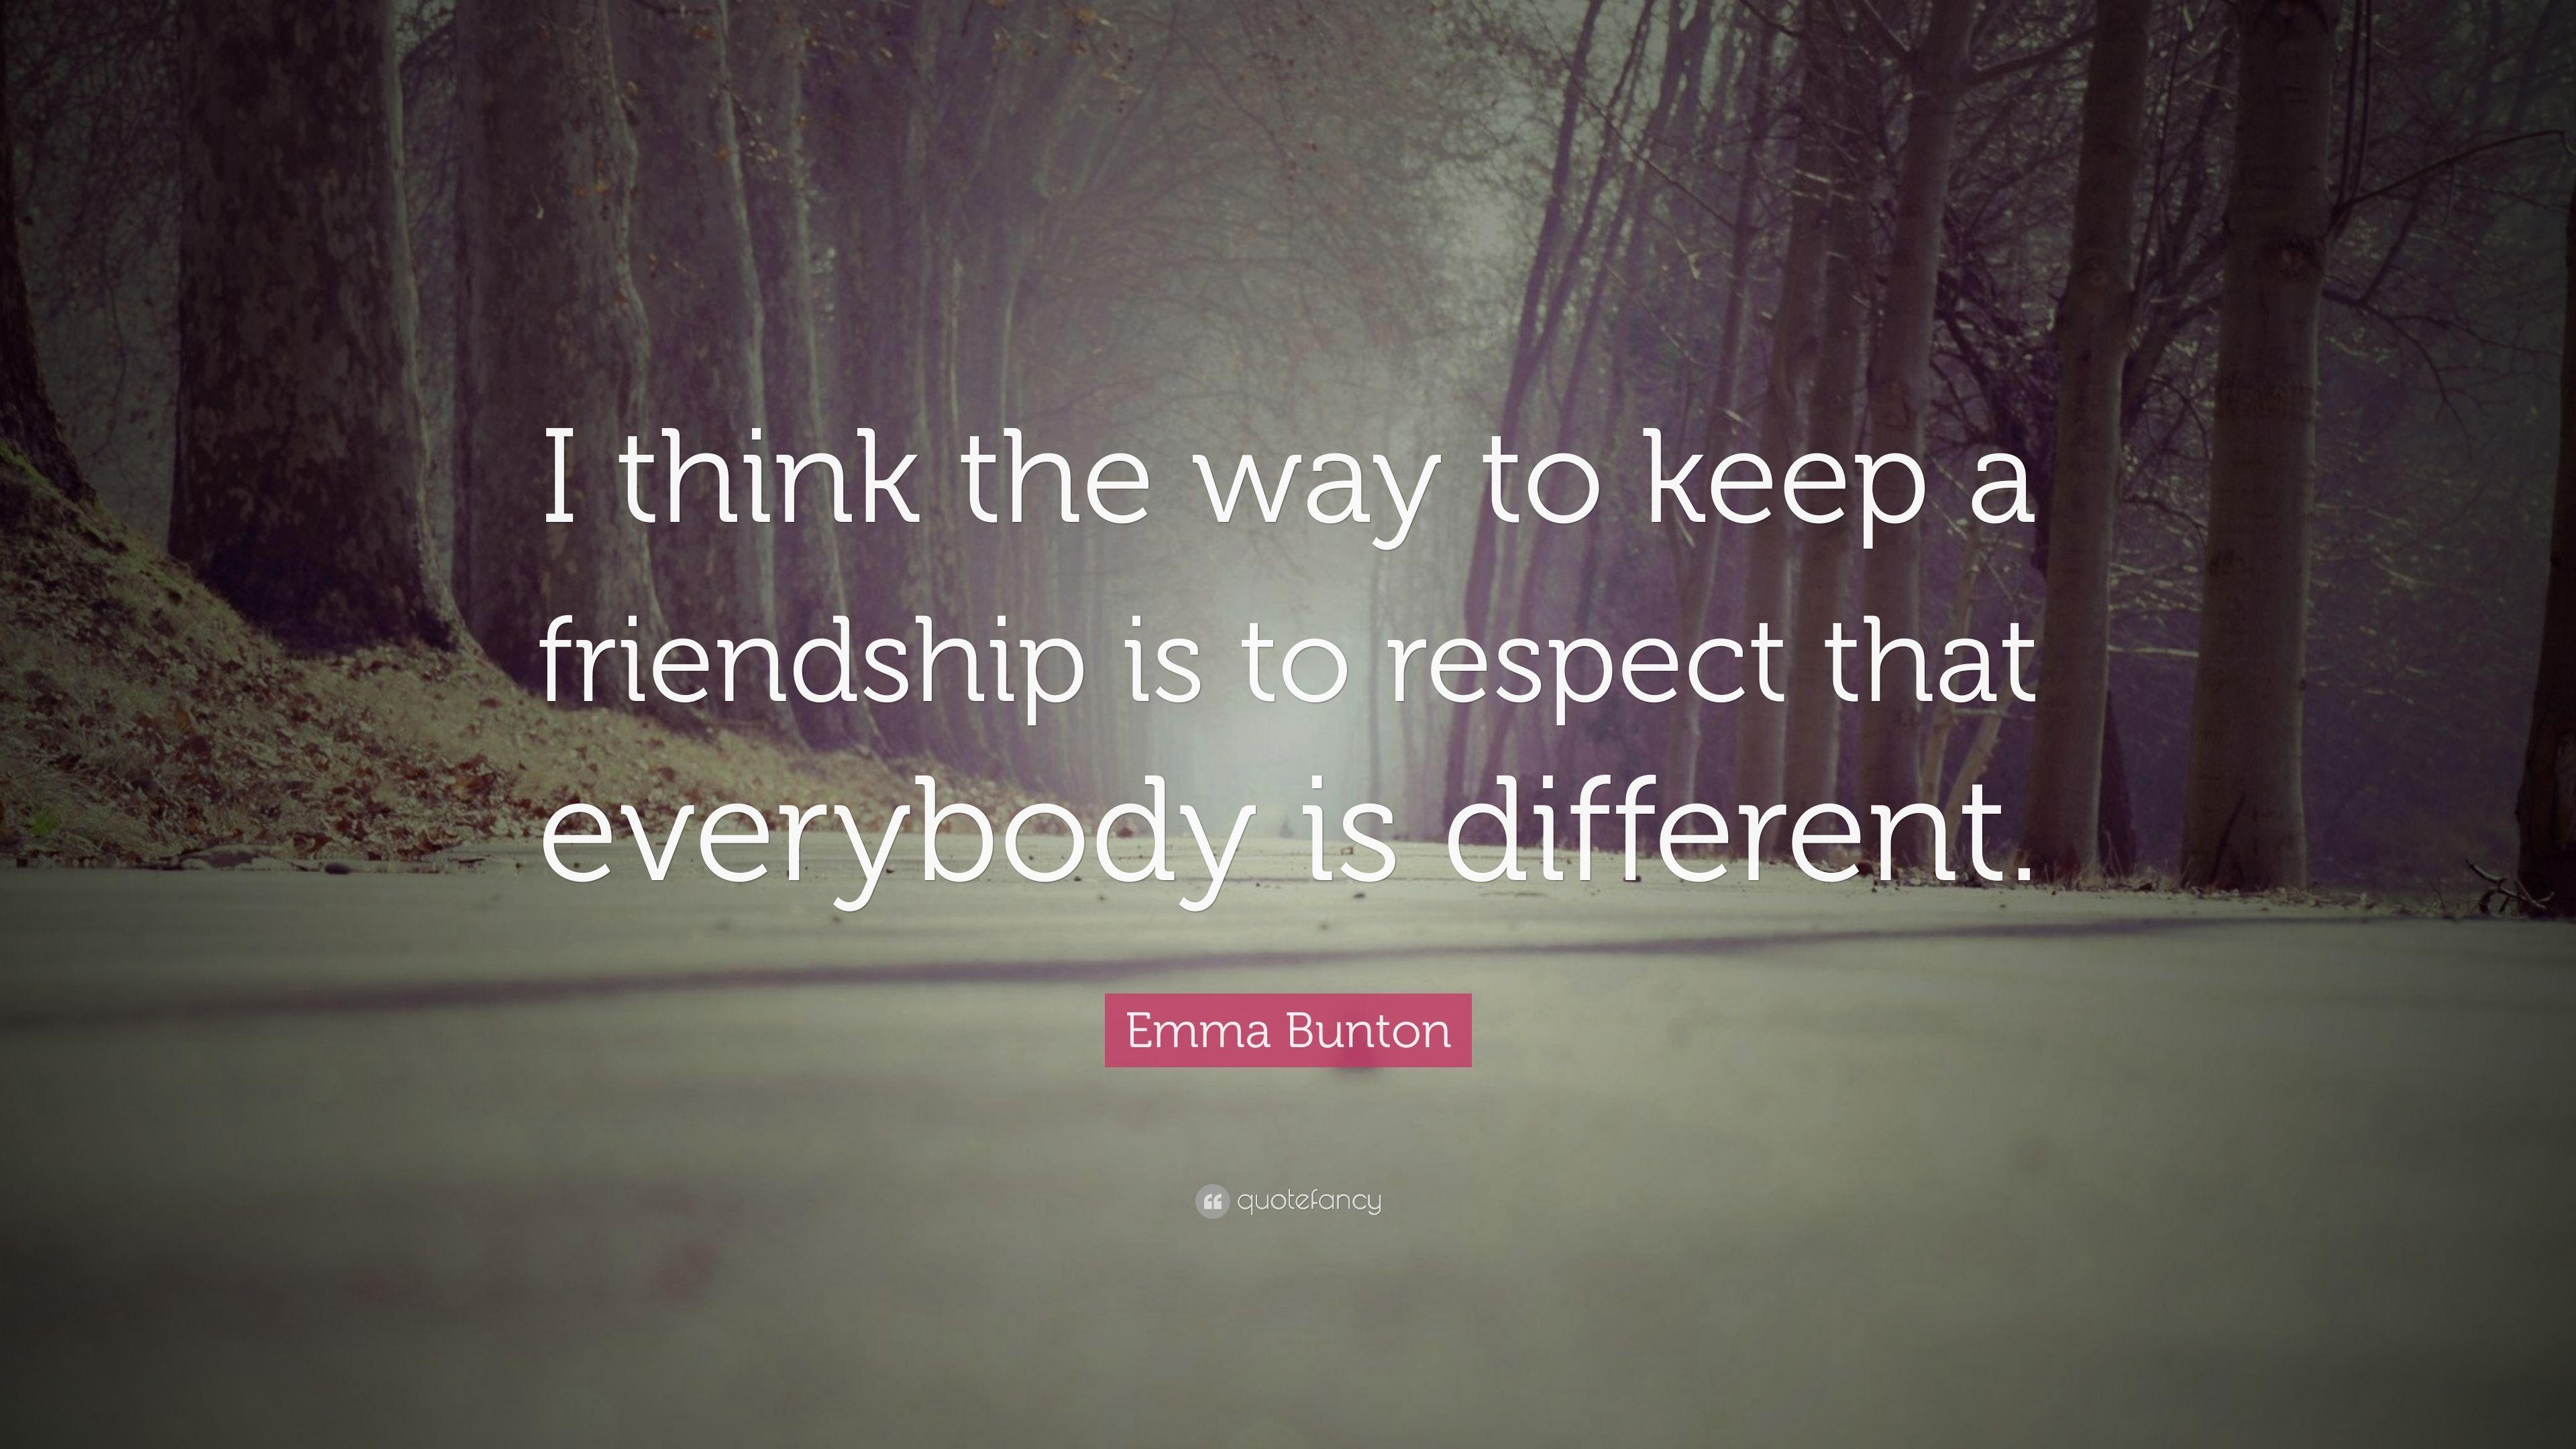 Emma Bunton Quote: "I think the way to keep a friendship is to.